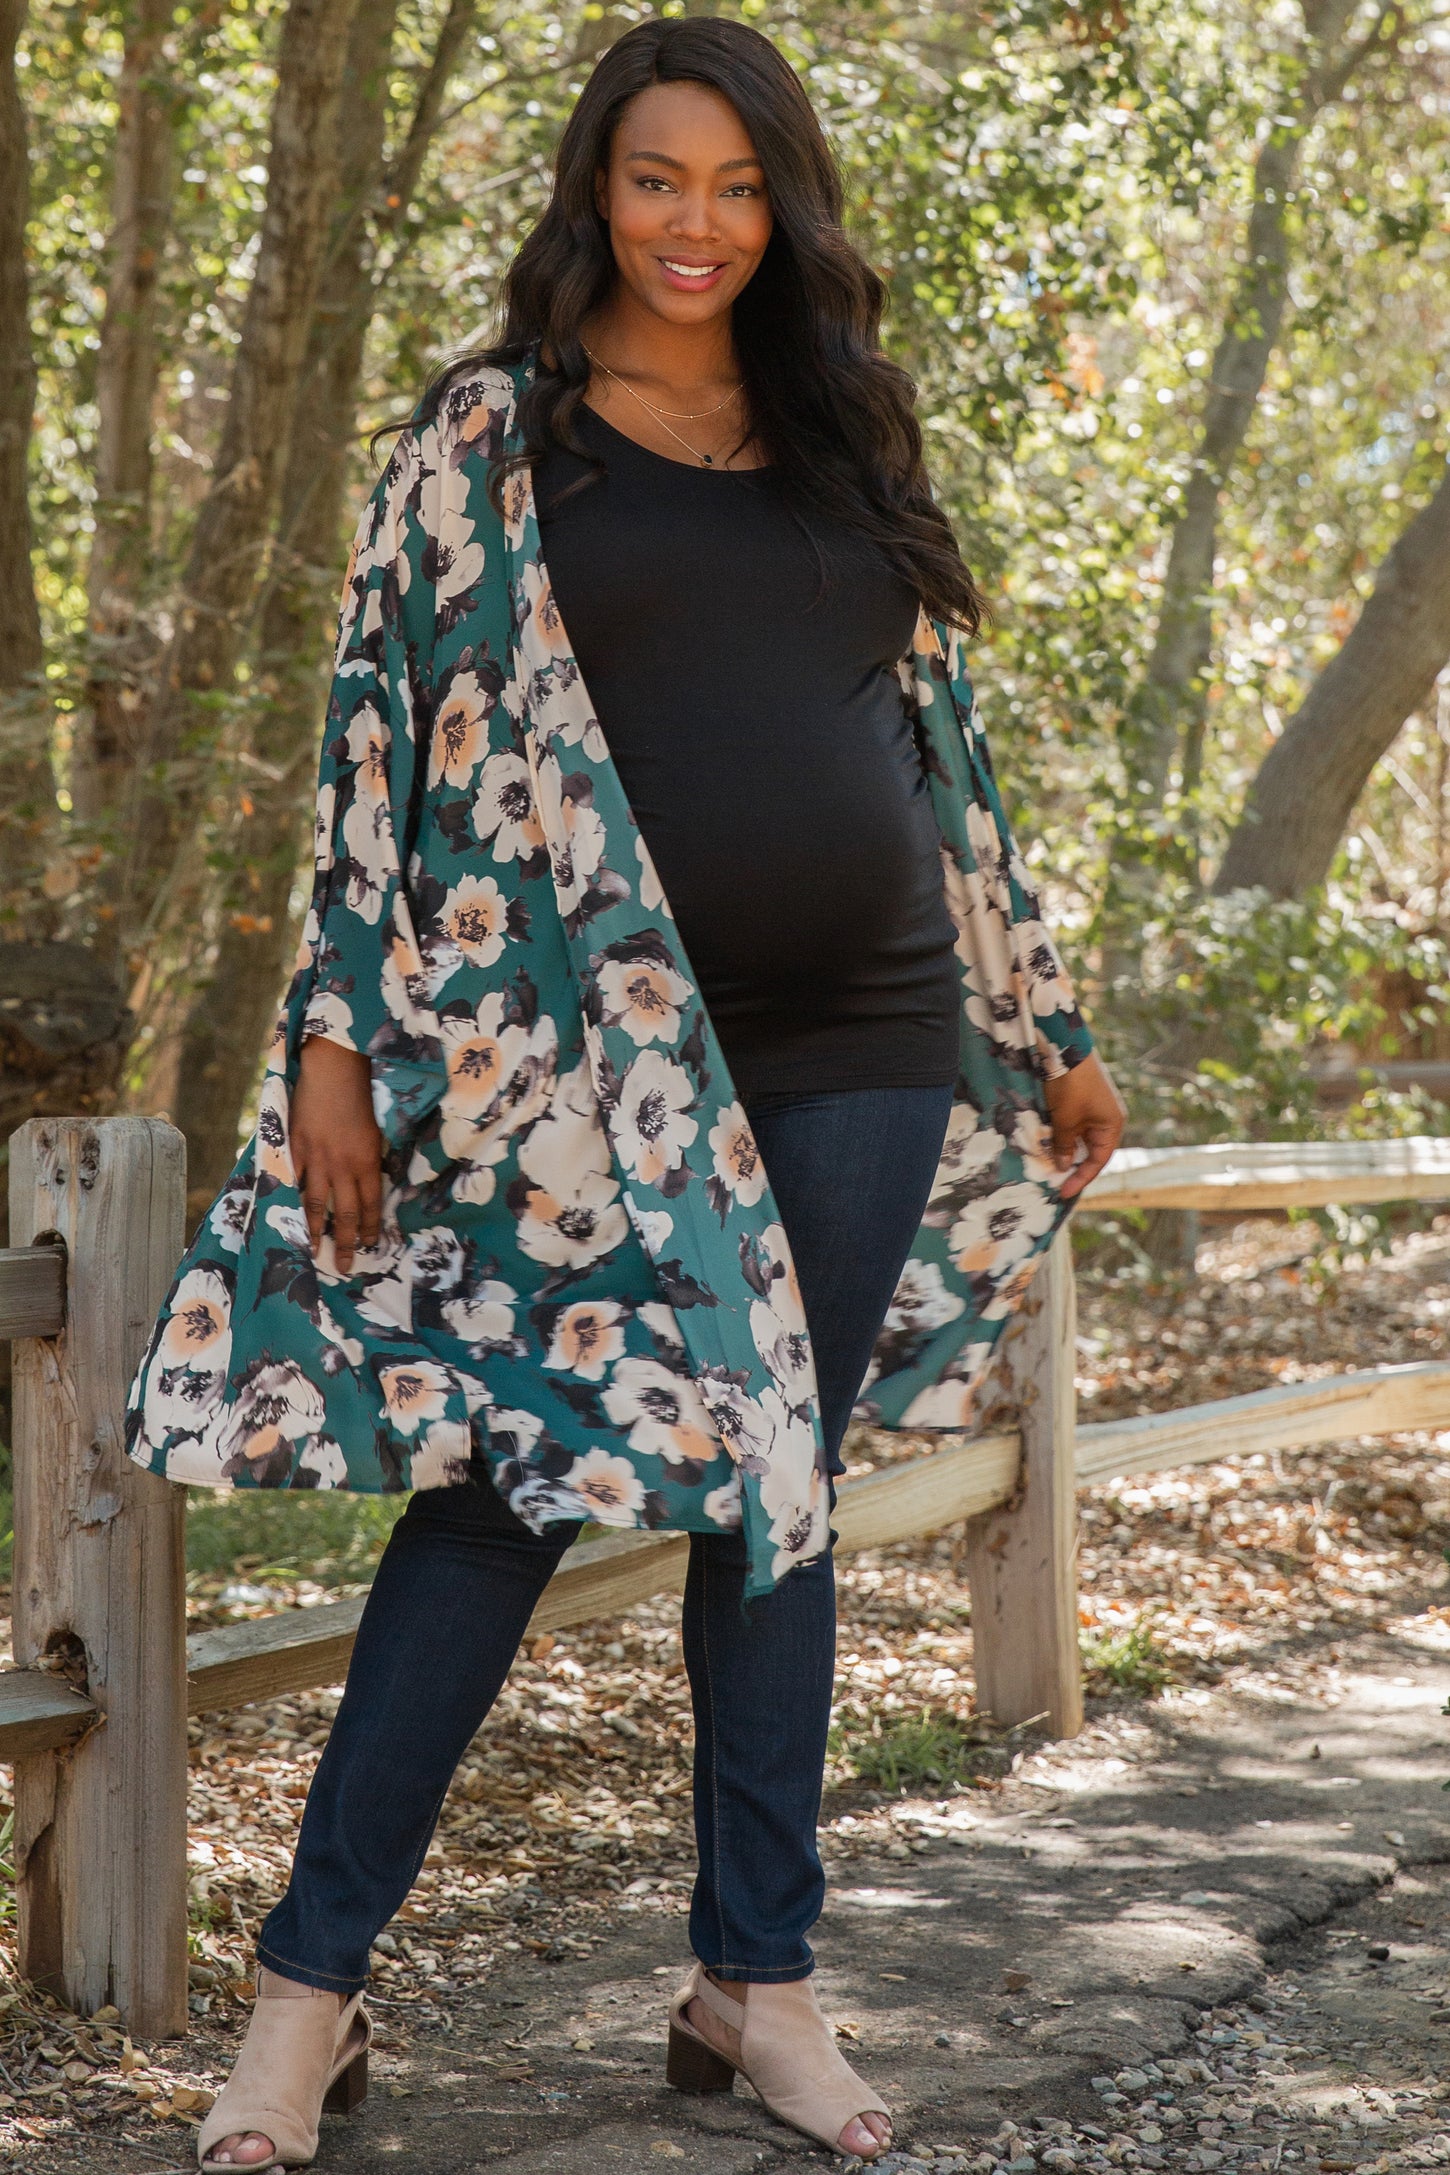 PinkBlush Green Floral Chiffon Long Maternity Plus Cover Up